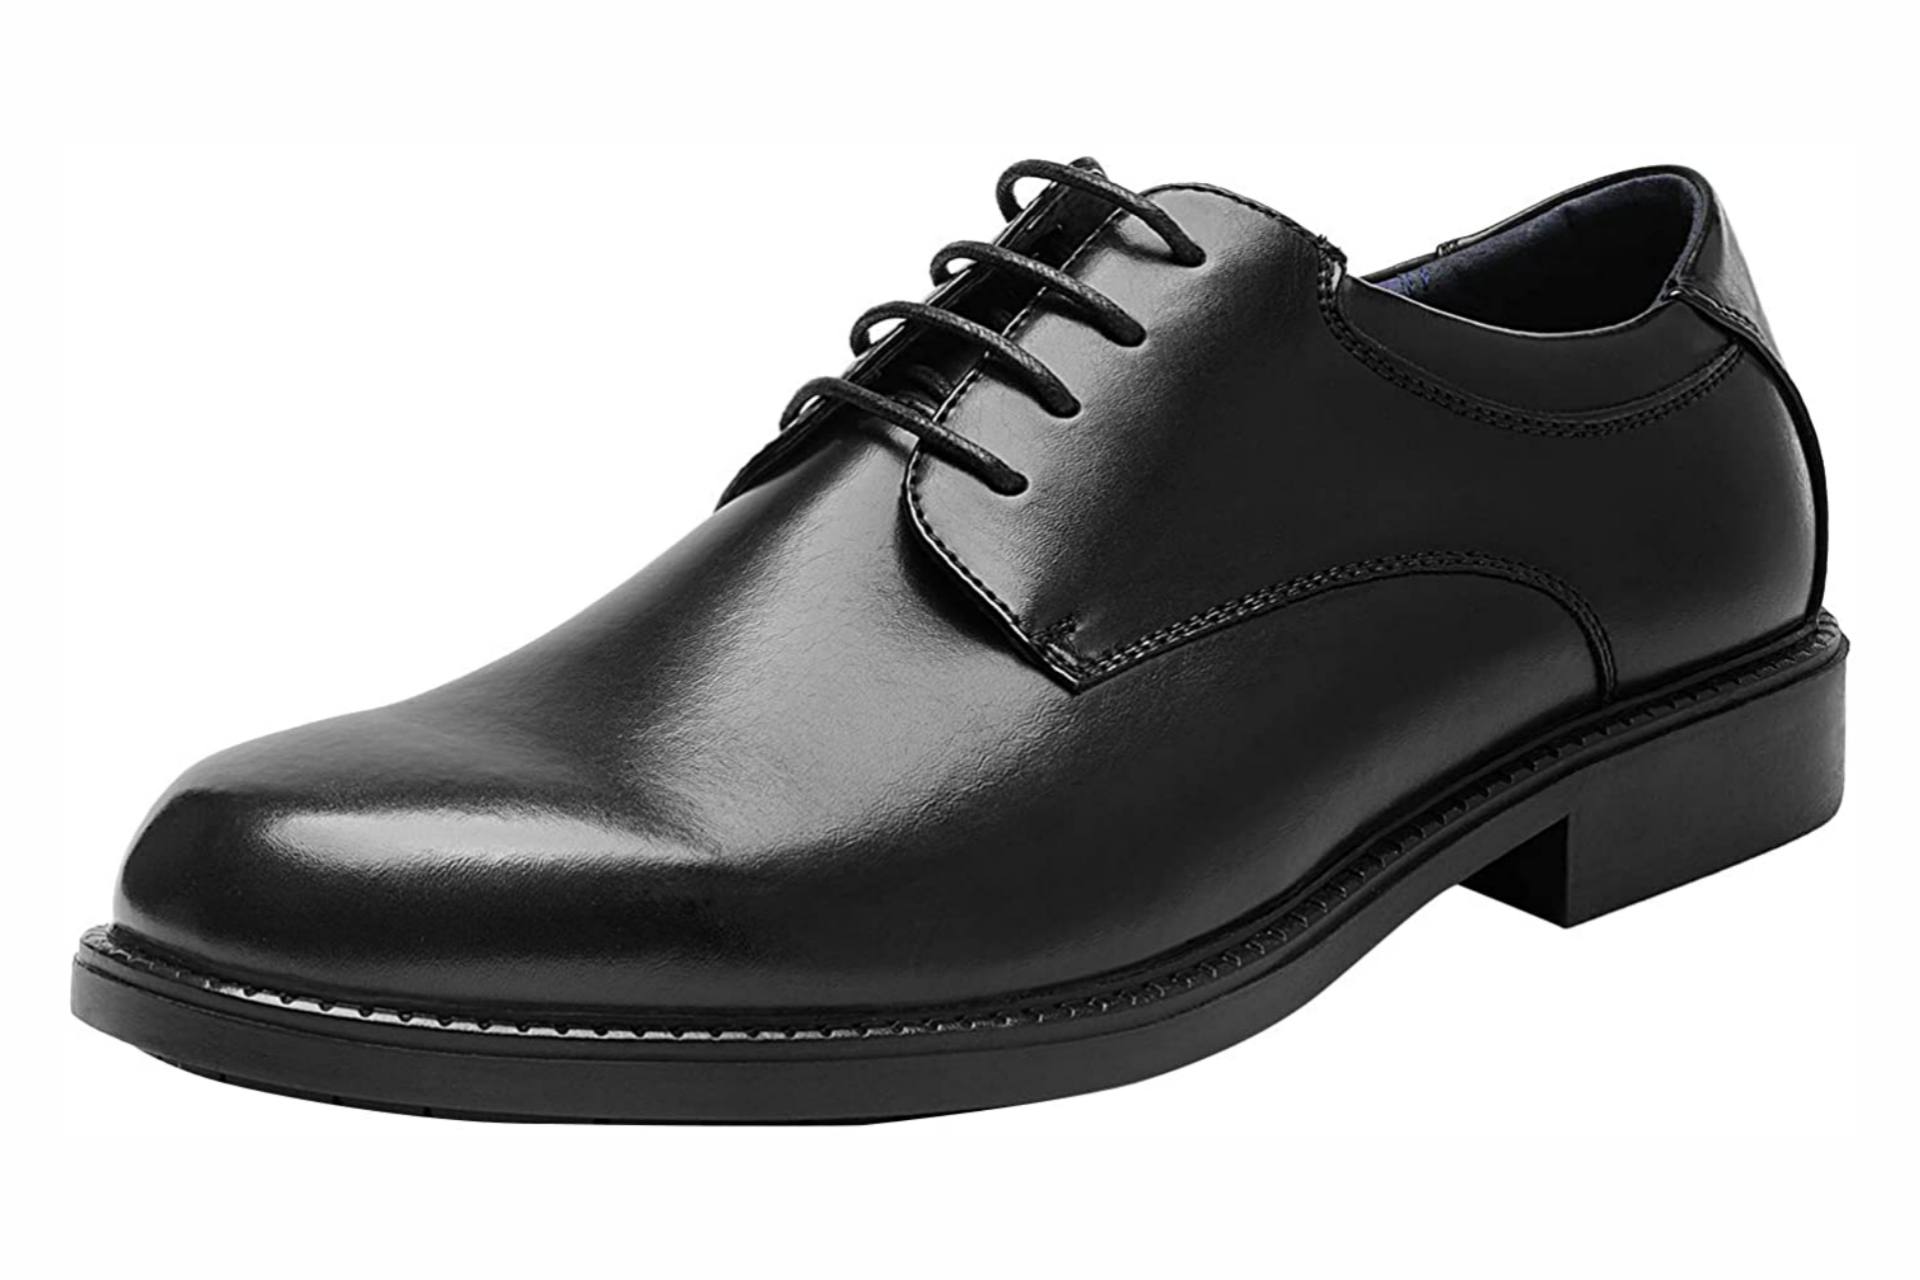 Quality dress shoes under 50 dollars